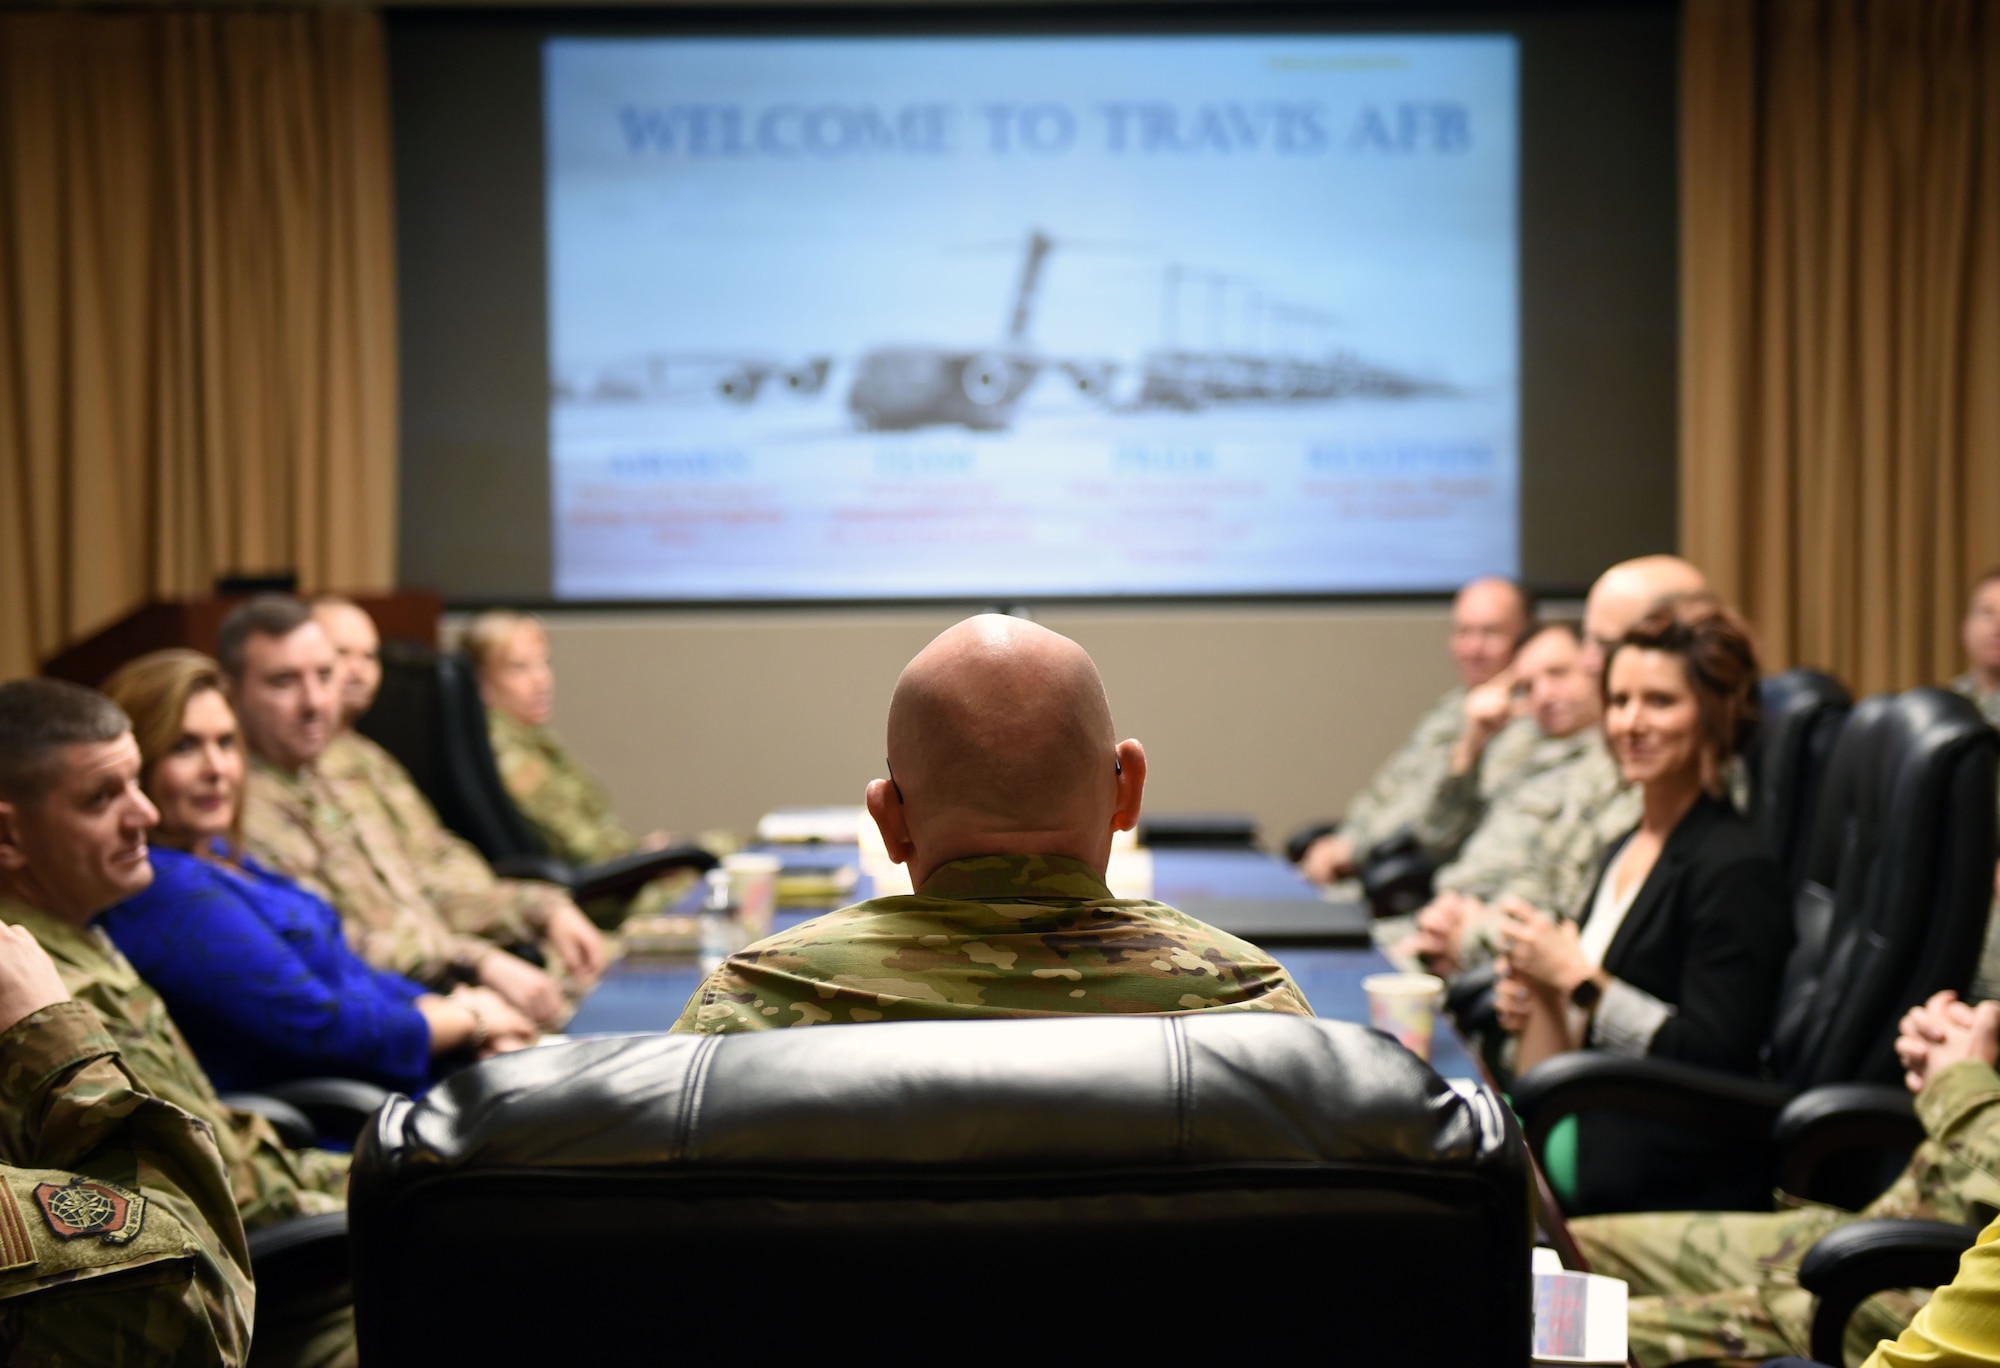 U.S. Air Force Maj. Gen. Sam Barrett, 18th Air Force commander, meets with leadership members of Travis Air Force Base, California, during a visit to the base March 5, 2019. Barrett, along with his wife, Kelly and U.S. Air Force Chief Master Sgt. Chris Simpson, 18th Air Force command chief, toured the base March 4 to 8 as part of a scheduled visit. (U.S. Air Force photo by Airman 1st Class Christian Conrad)